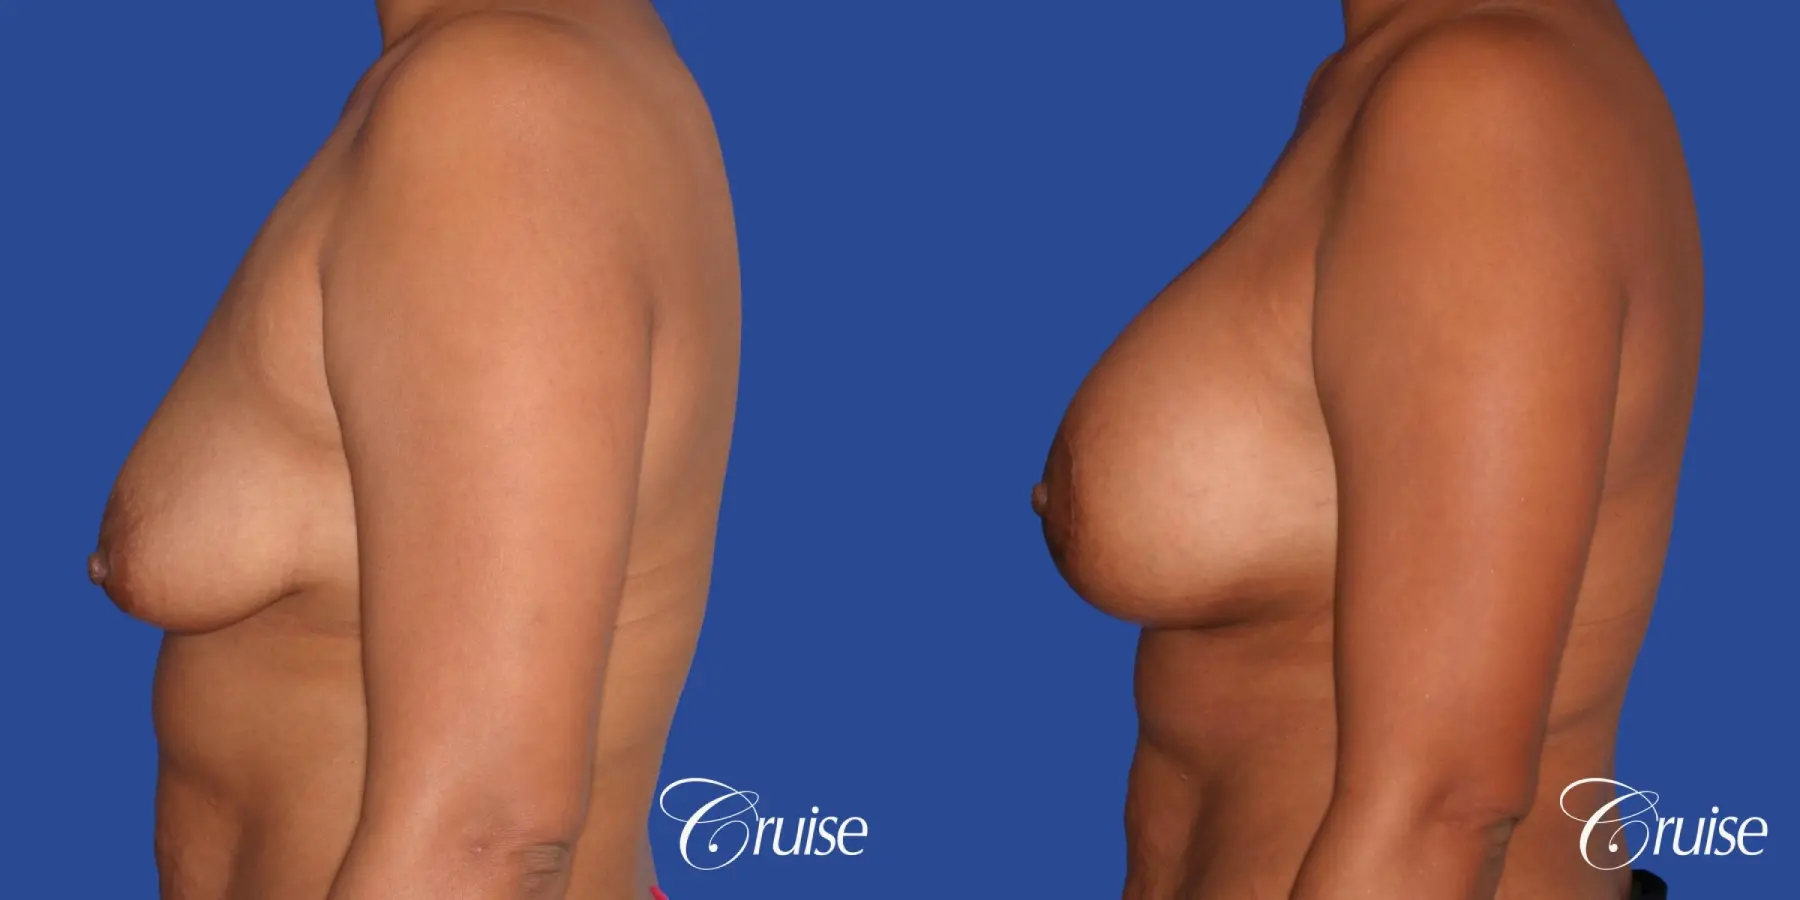 best breast lift donut with saline augmentation - Before and After 2